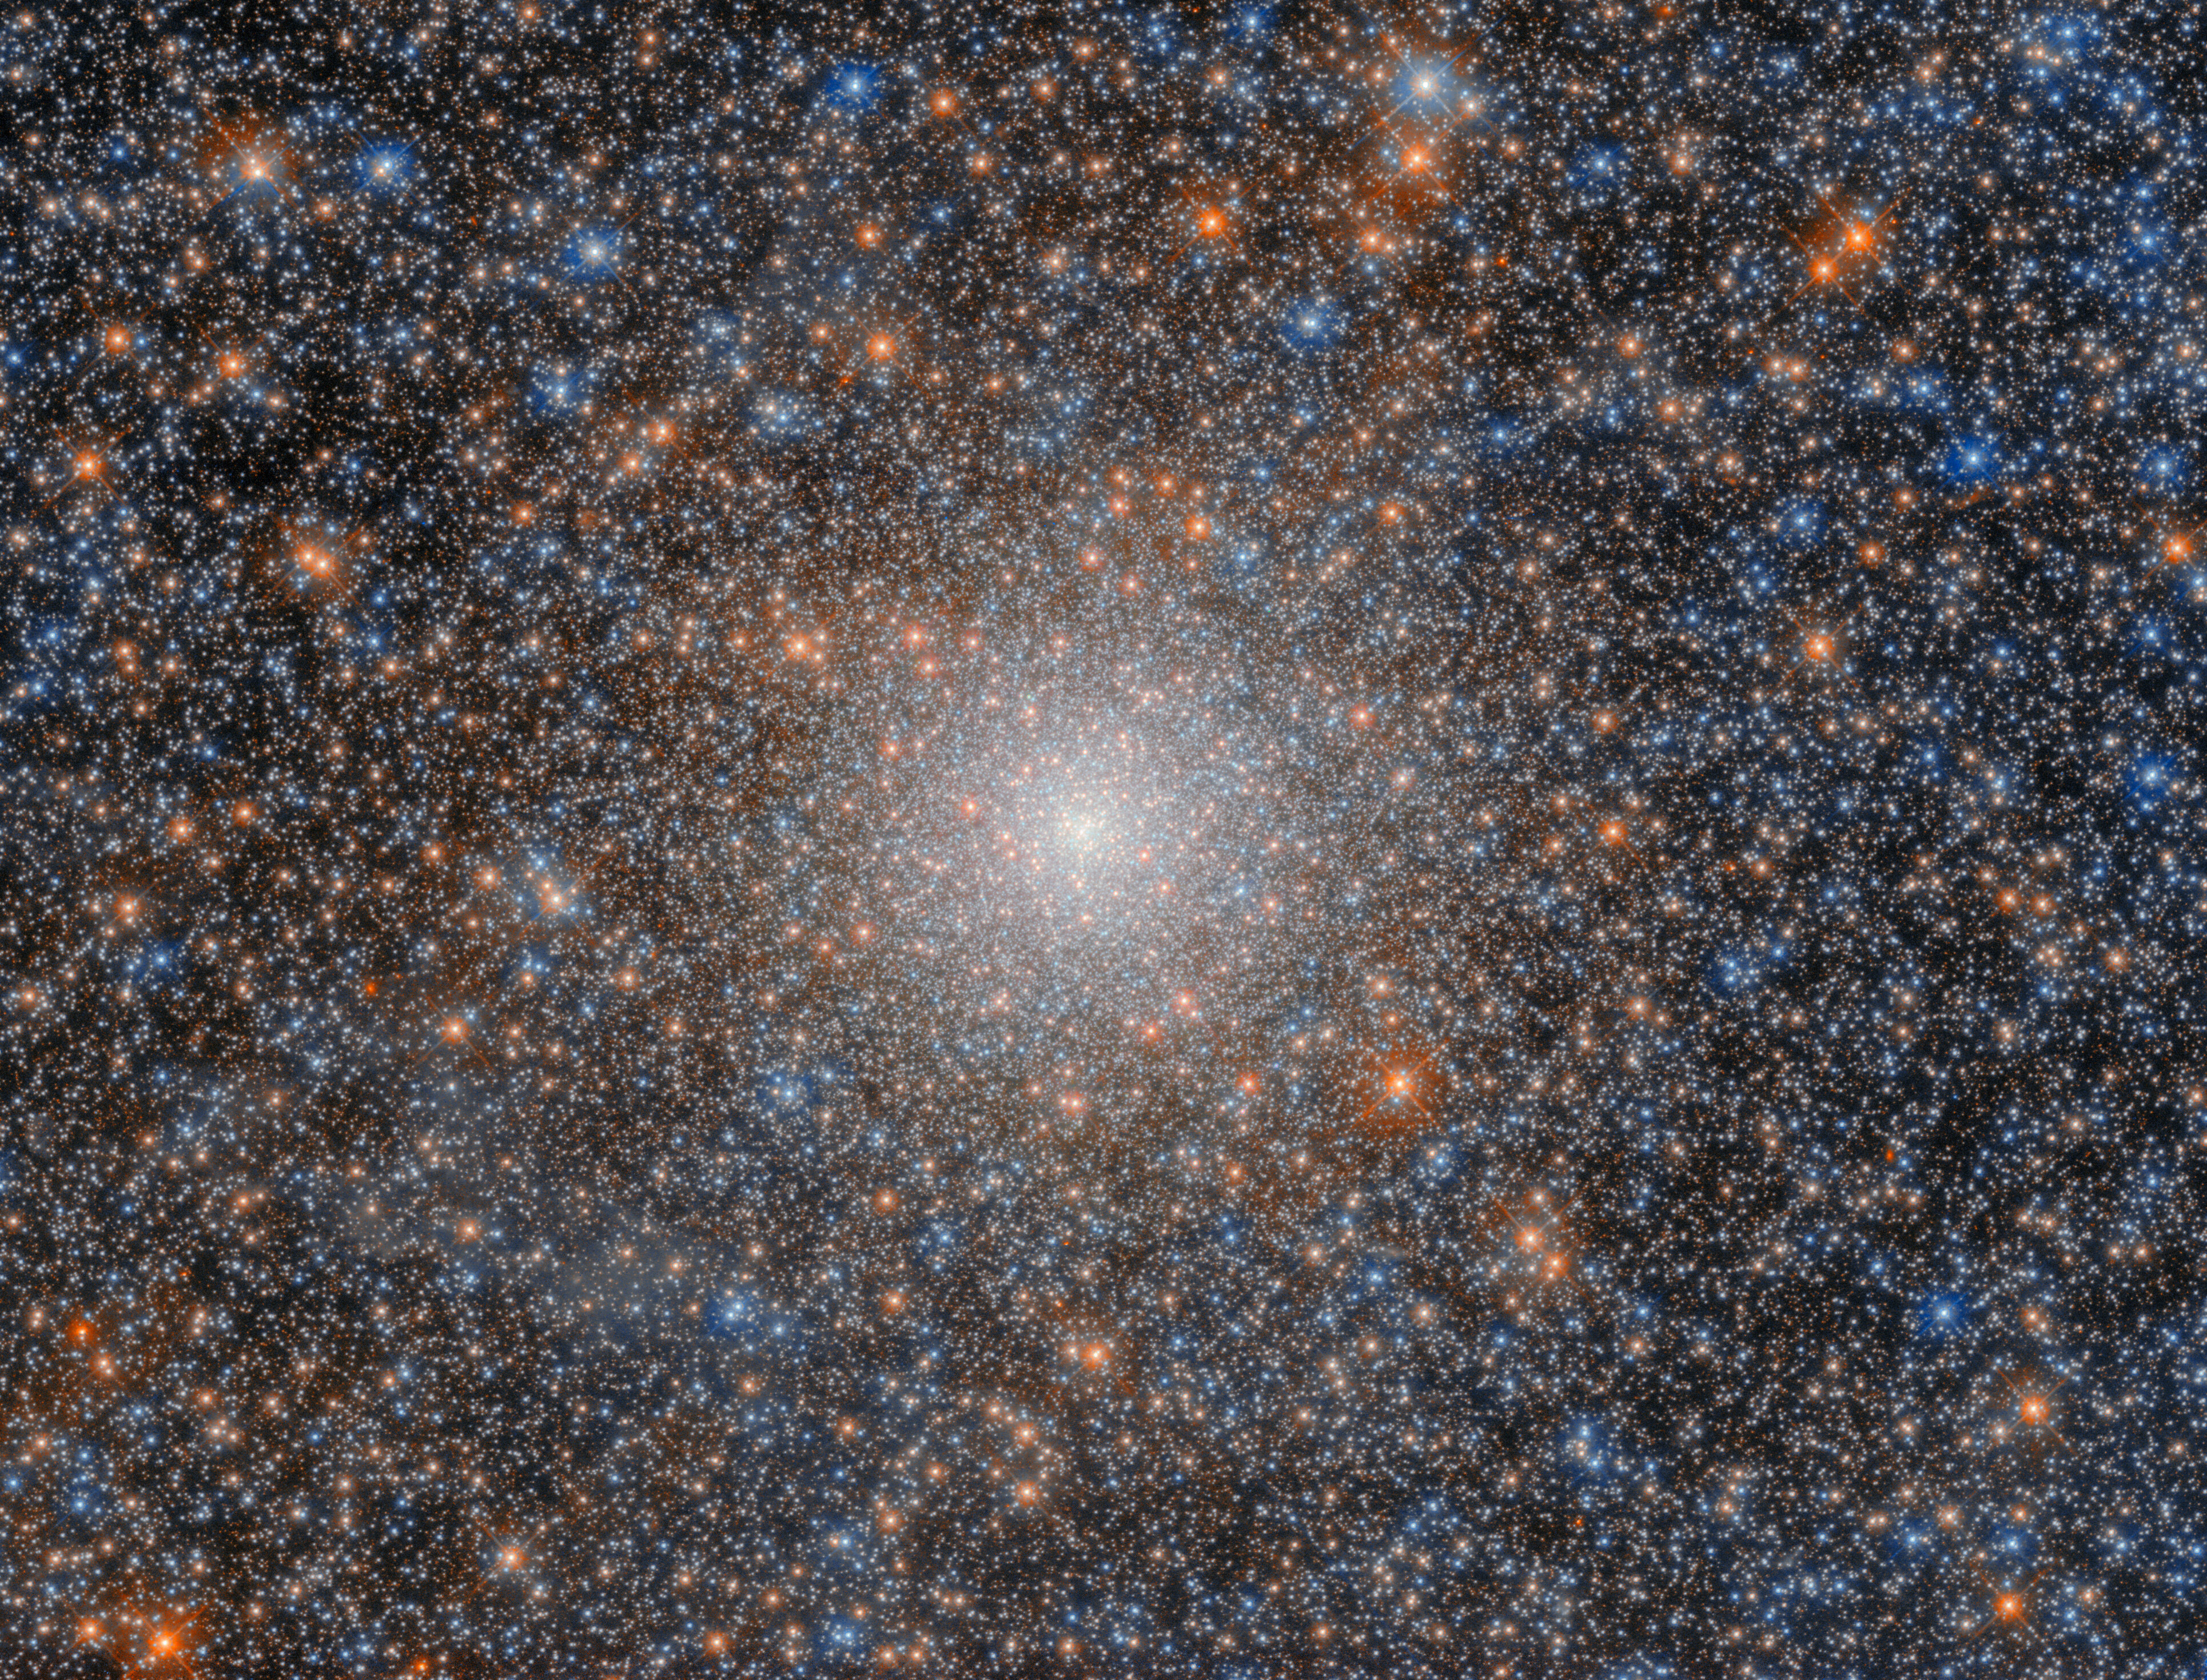 Hubble Observes a Cosmic Fossil